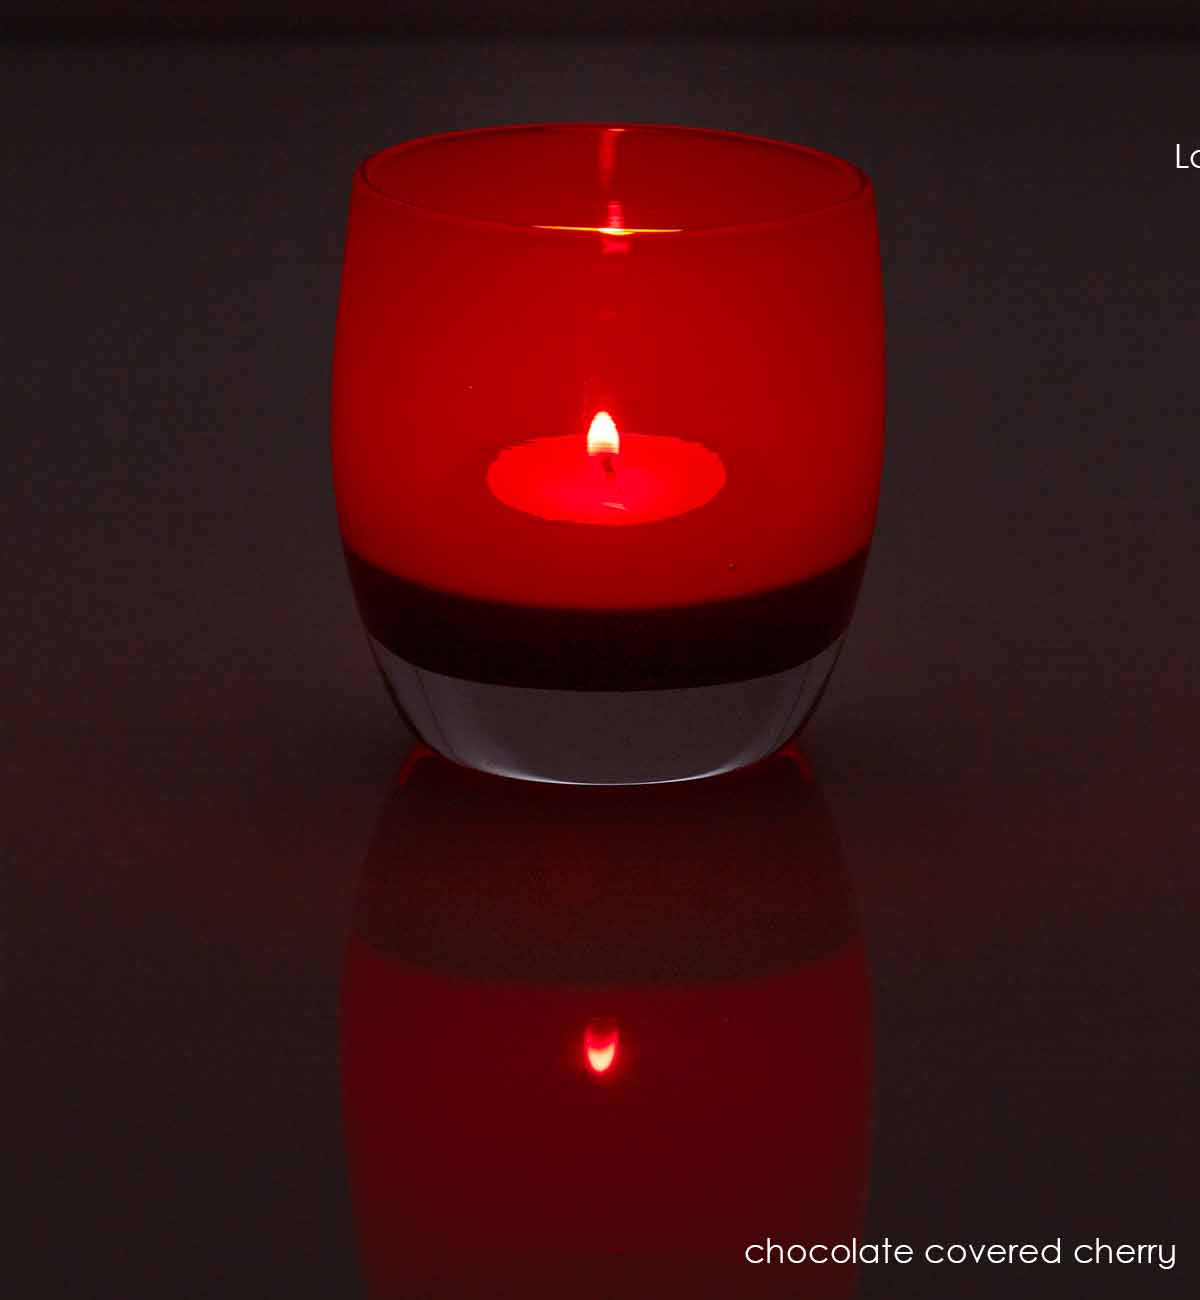 chocolate covered cherry, translucent red brown hand-blown glass votive candle holder. light by candle light.